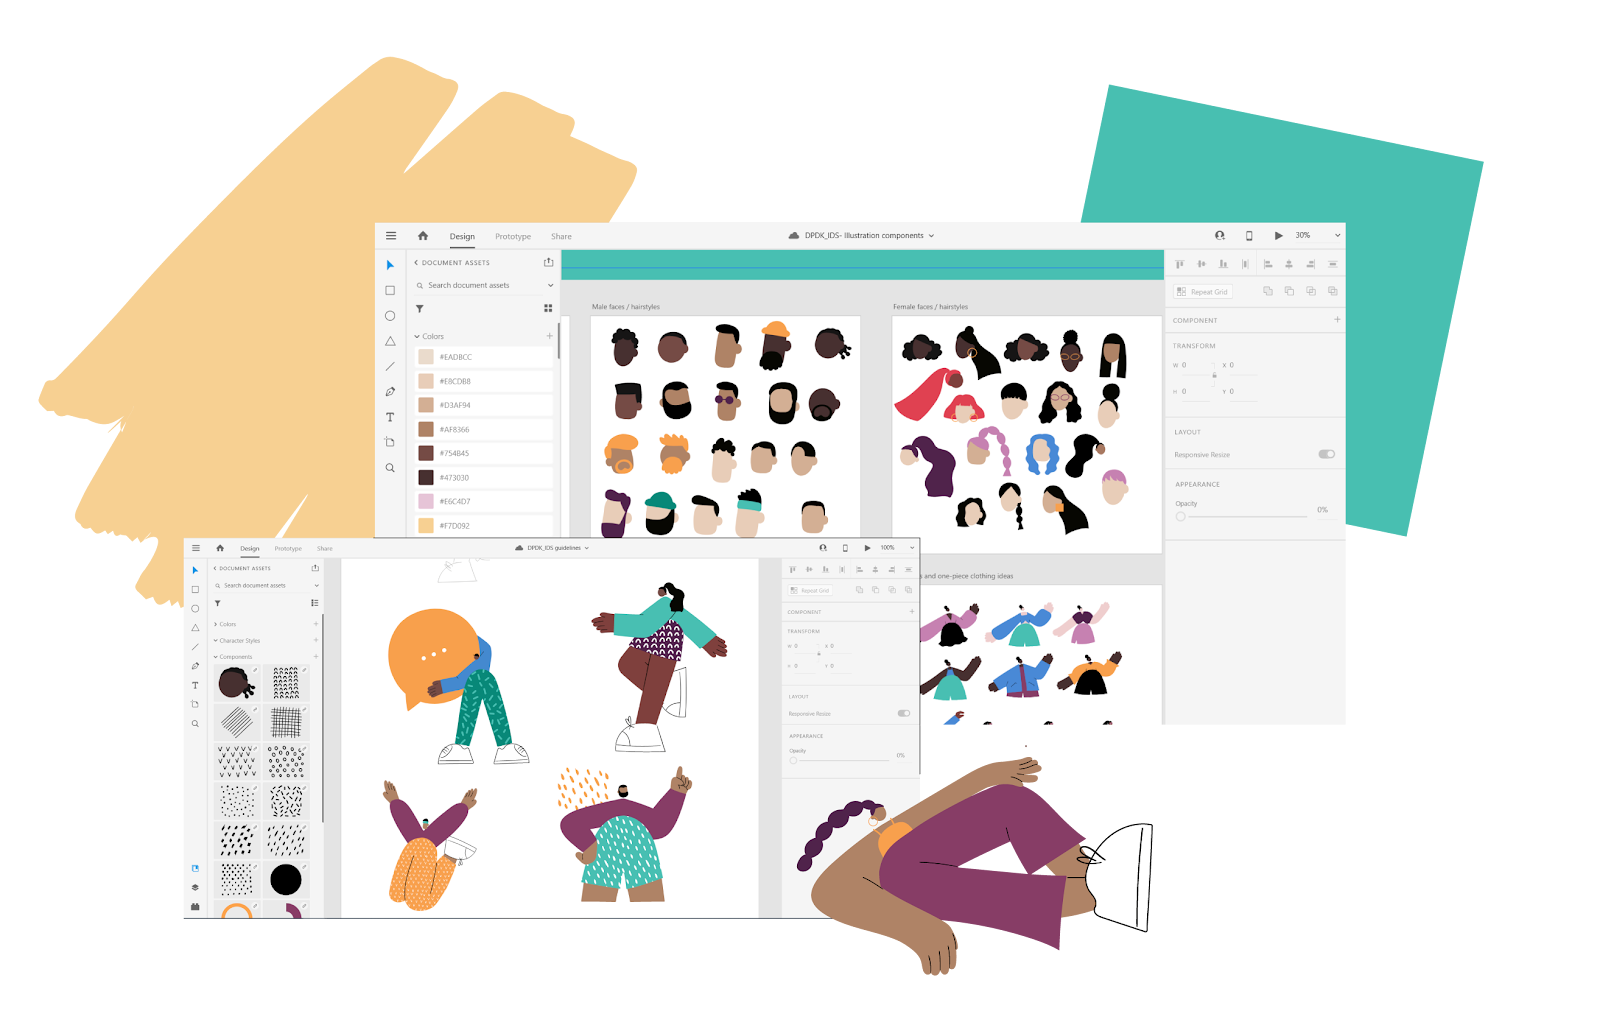 A snapshot of screens in Adobe XD, showcasing DPDK's inclusive design system with its different characters of diverse backgrounds.